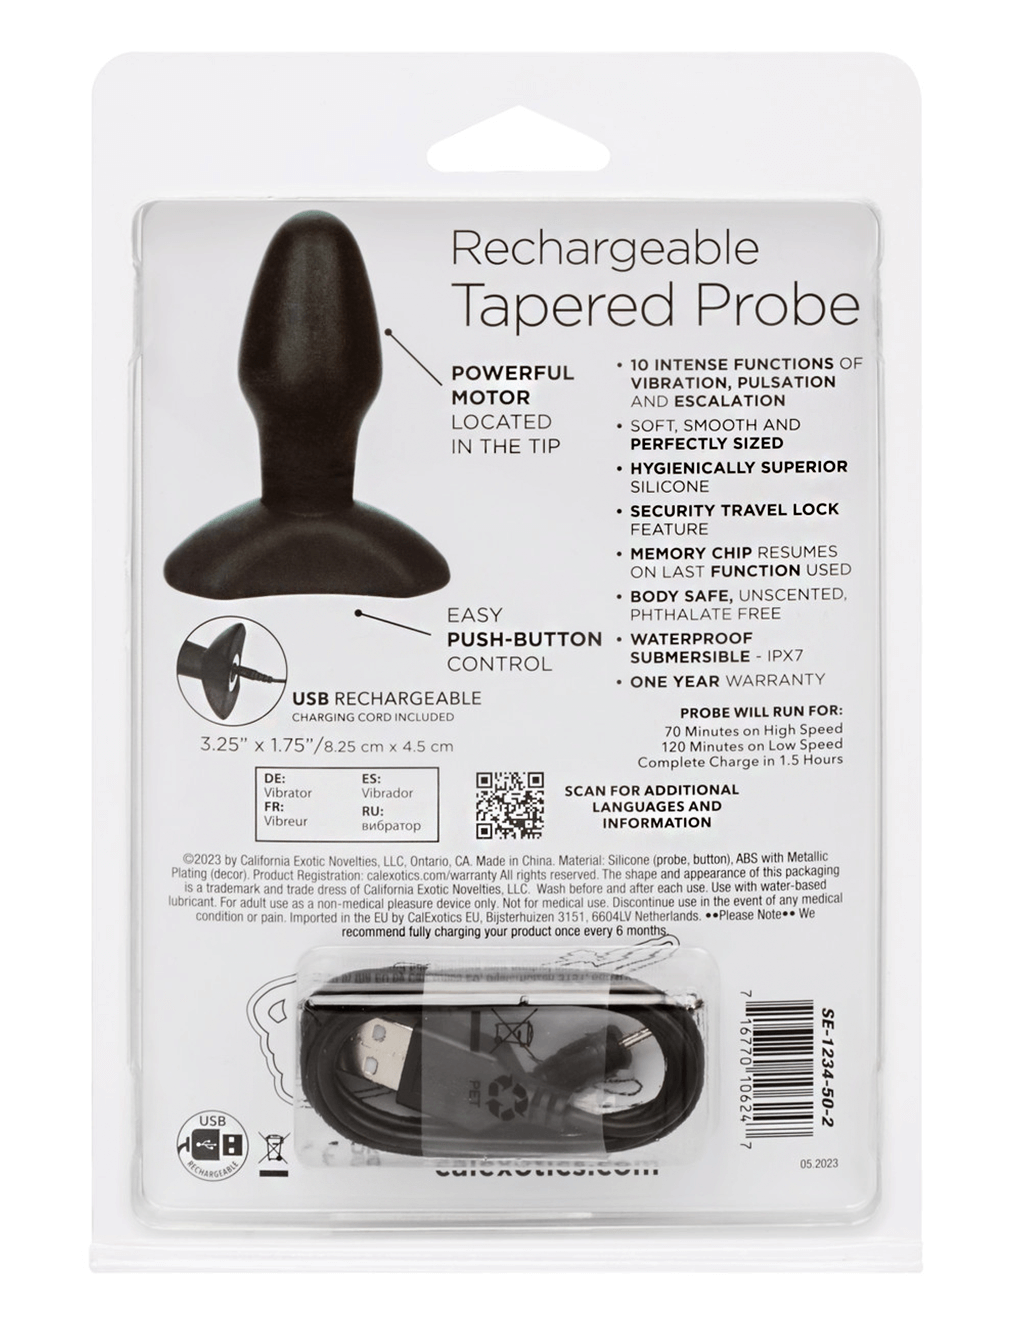 Rechargeable Tapered Probe - Box Back